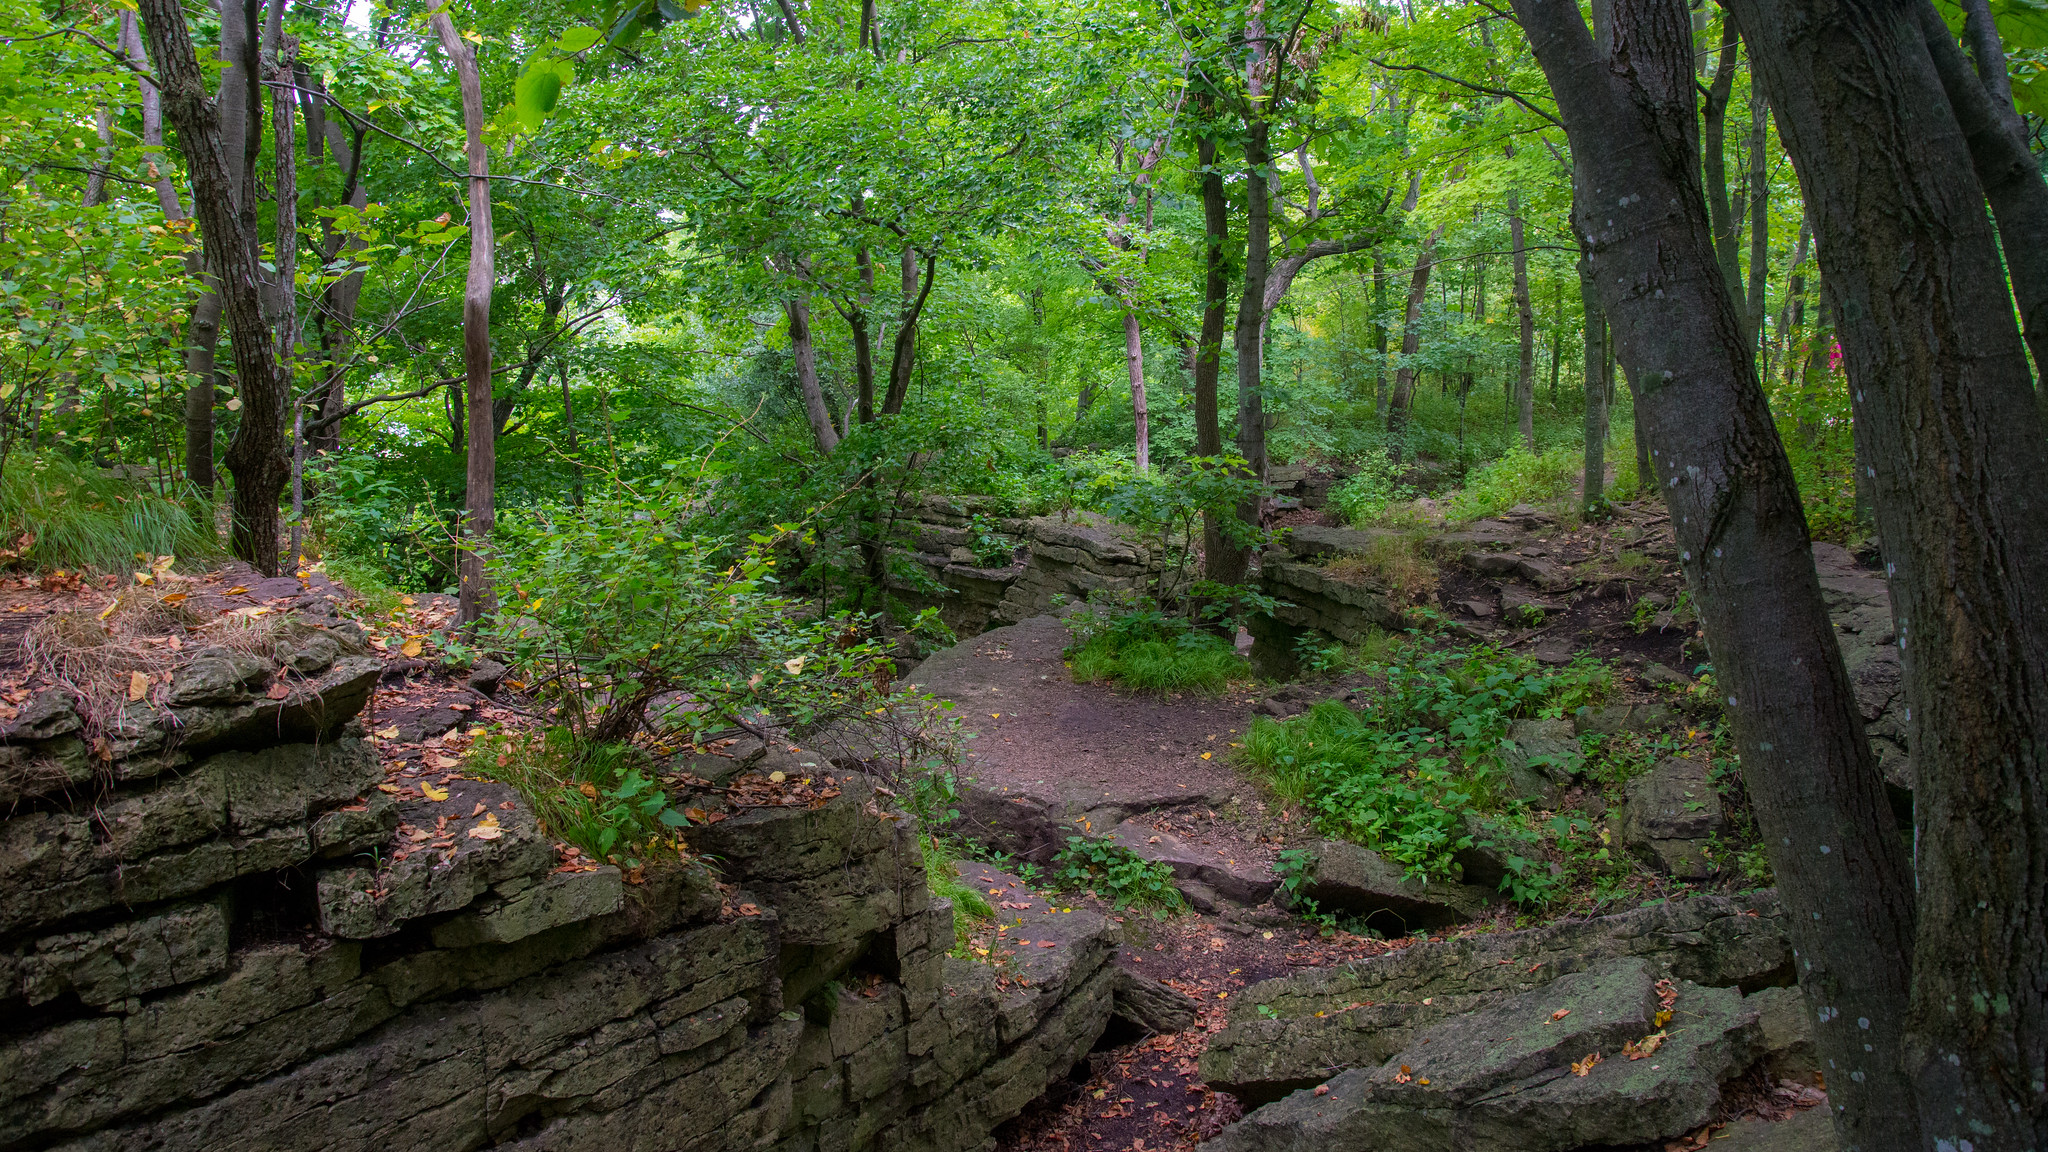 Rock outcroppings in forest